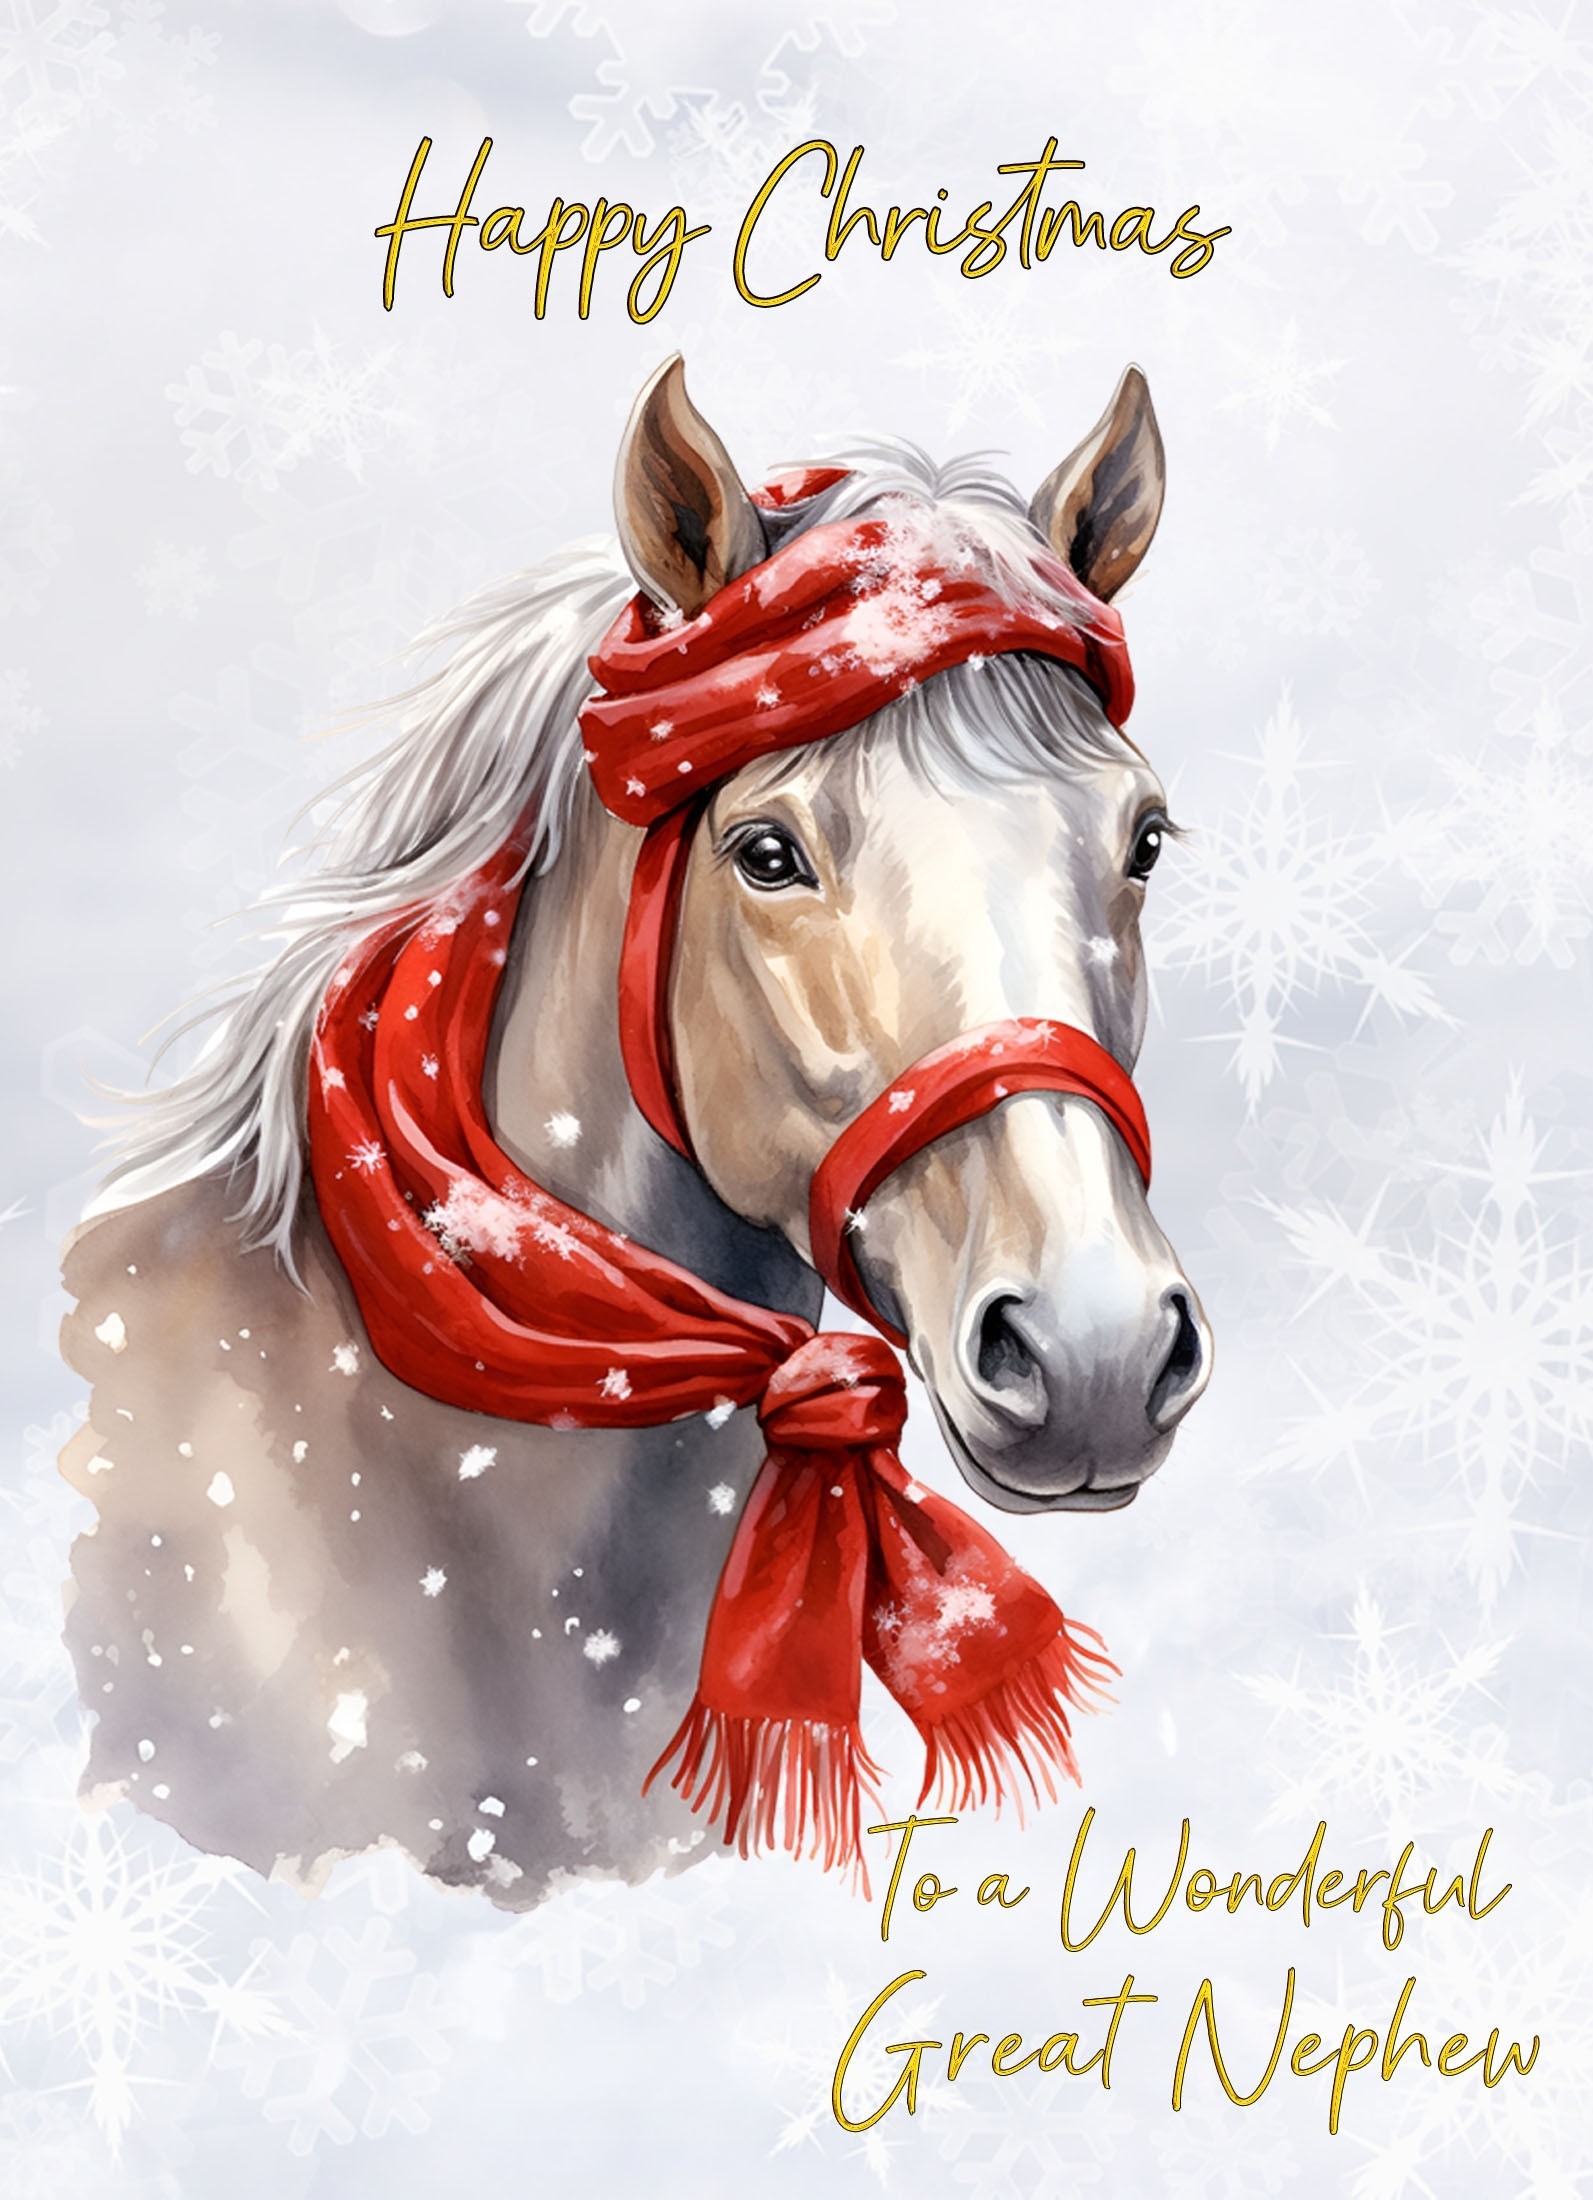 Christmas Card For Great Nephew (Horse Art Red)